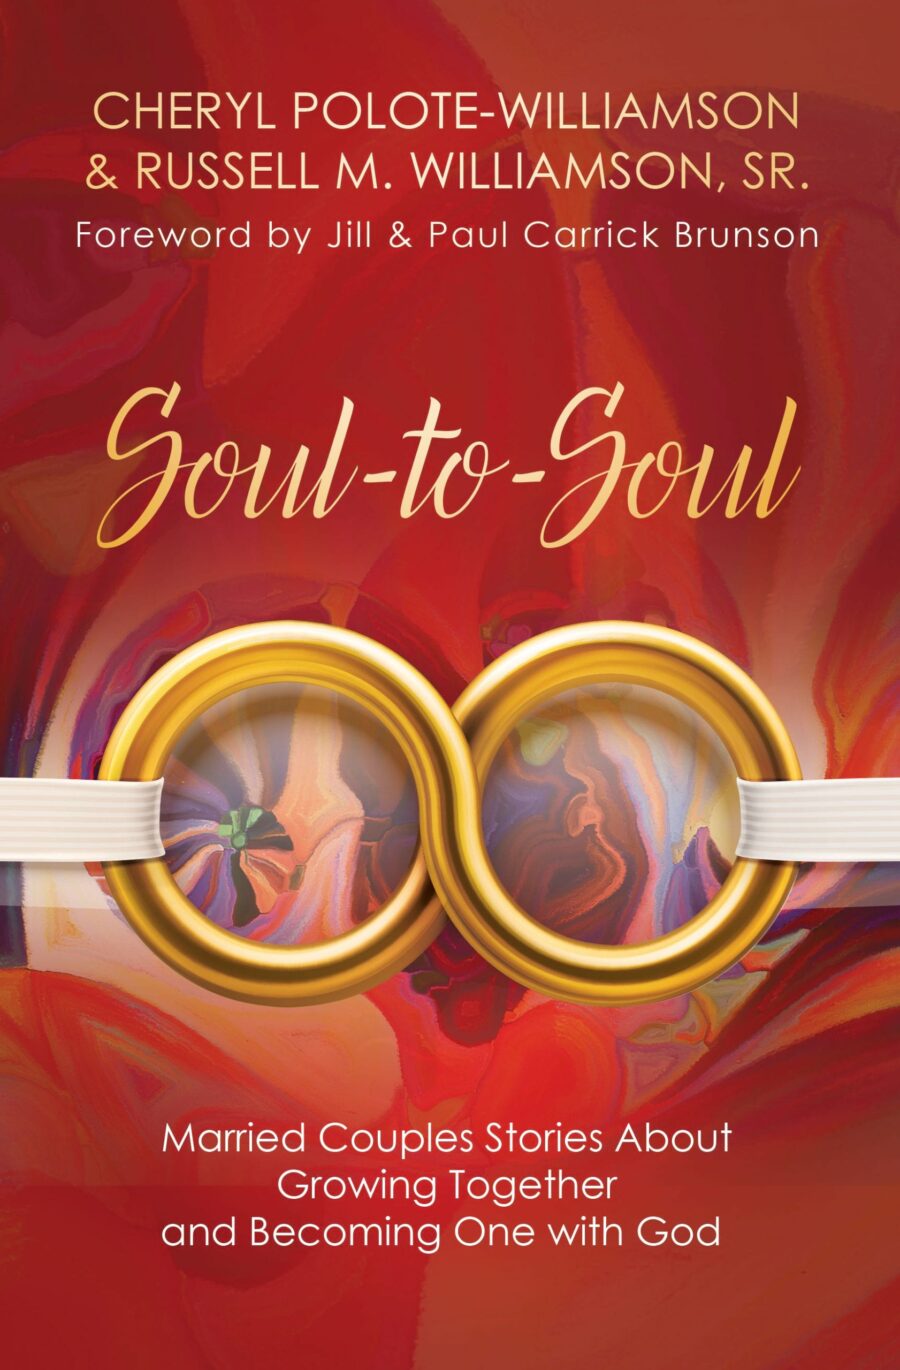 Soul-to-Soul: Married Couples Stories About Growing Together and Becoming One with God [Softback]